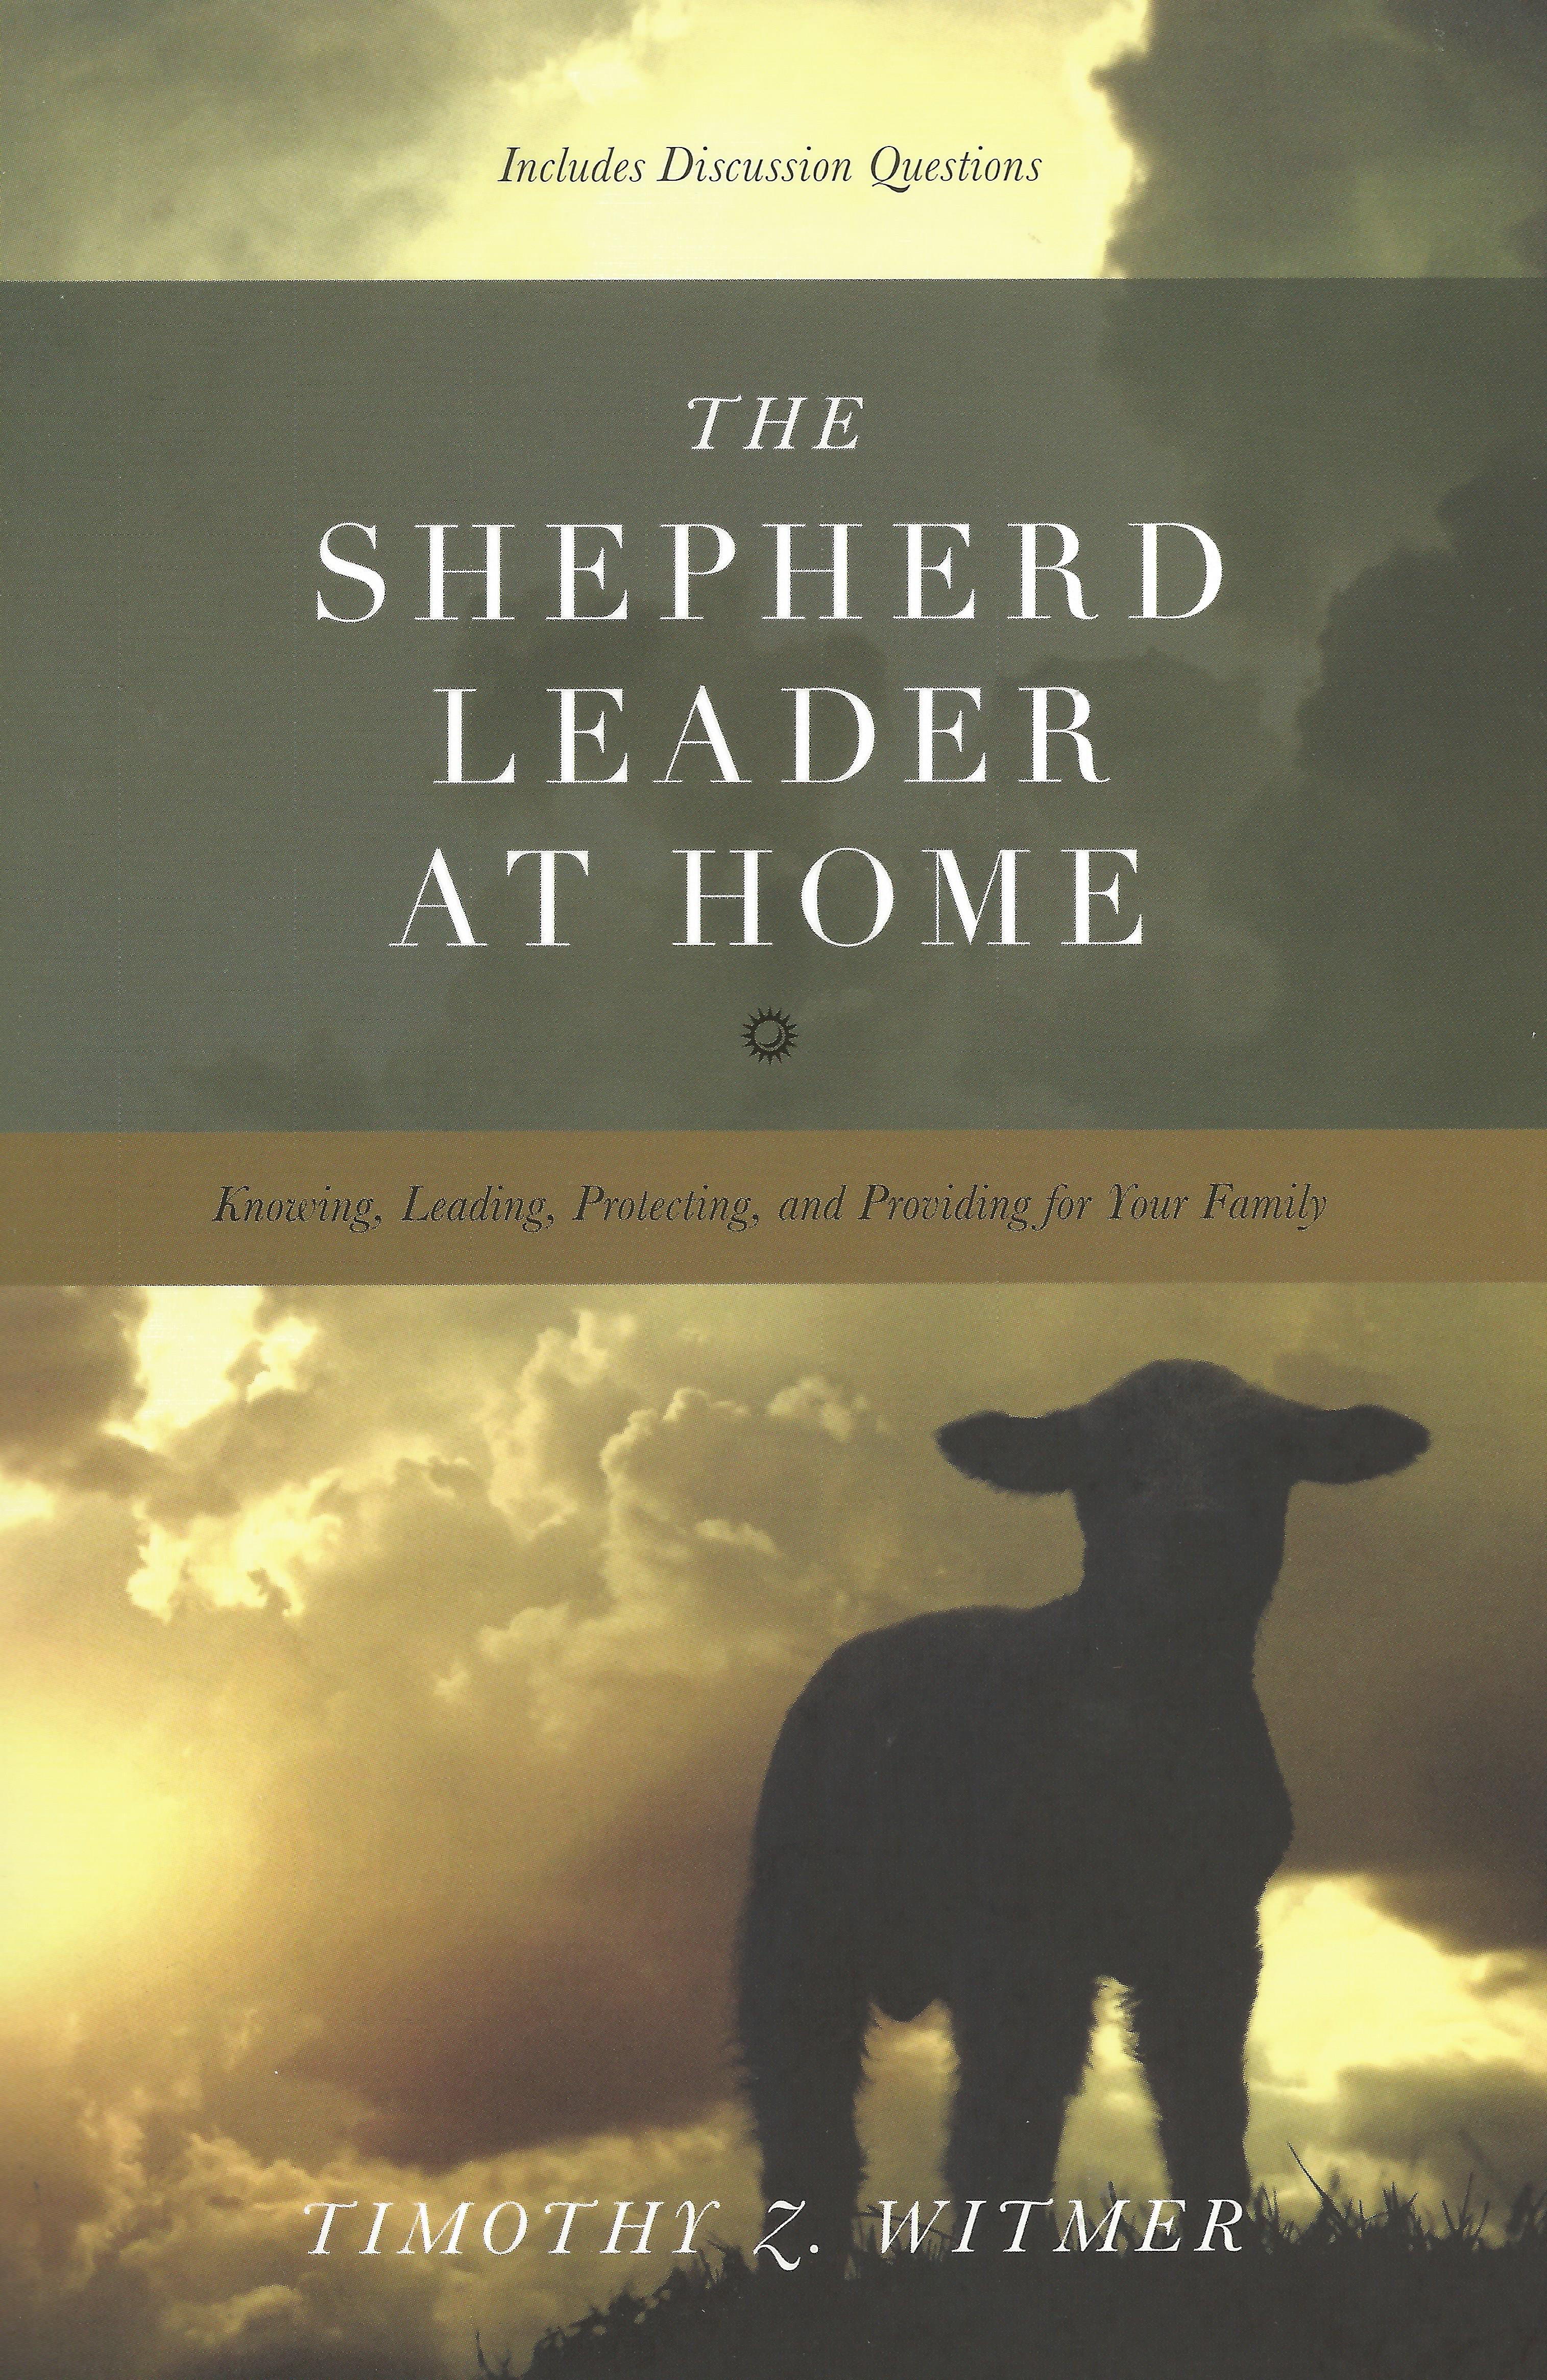 THE SHEPHERD LEADER AT HOME TIMOTHY WITMER